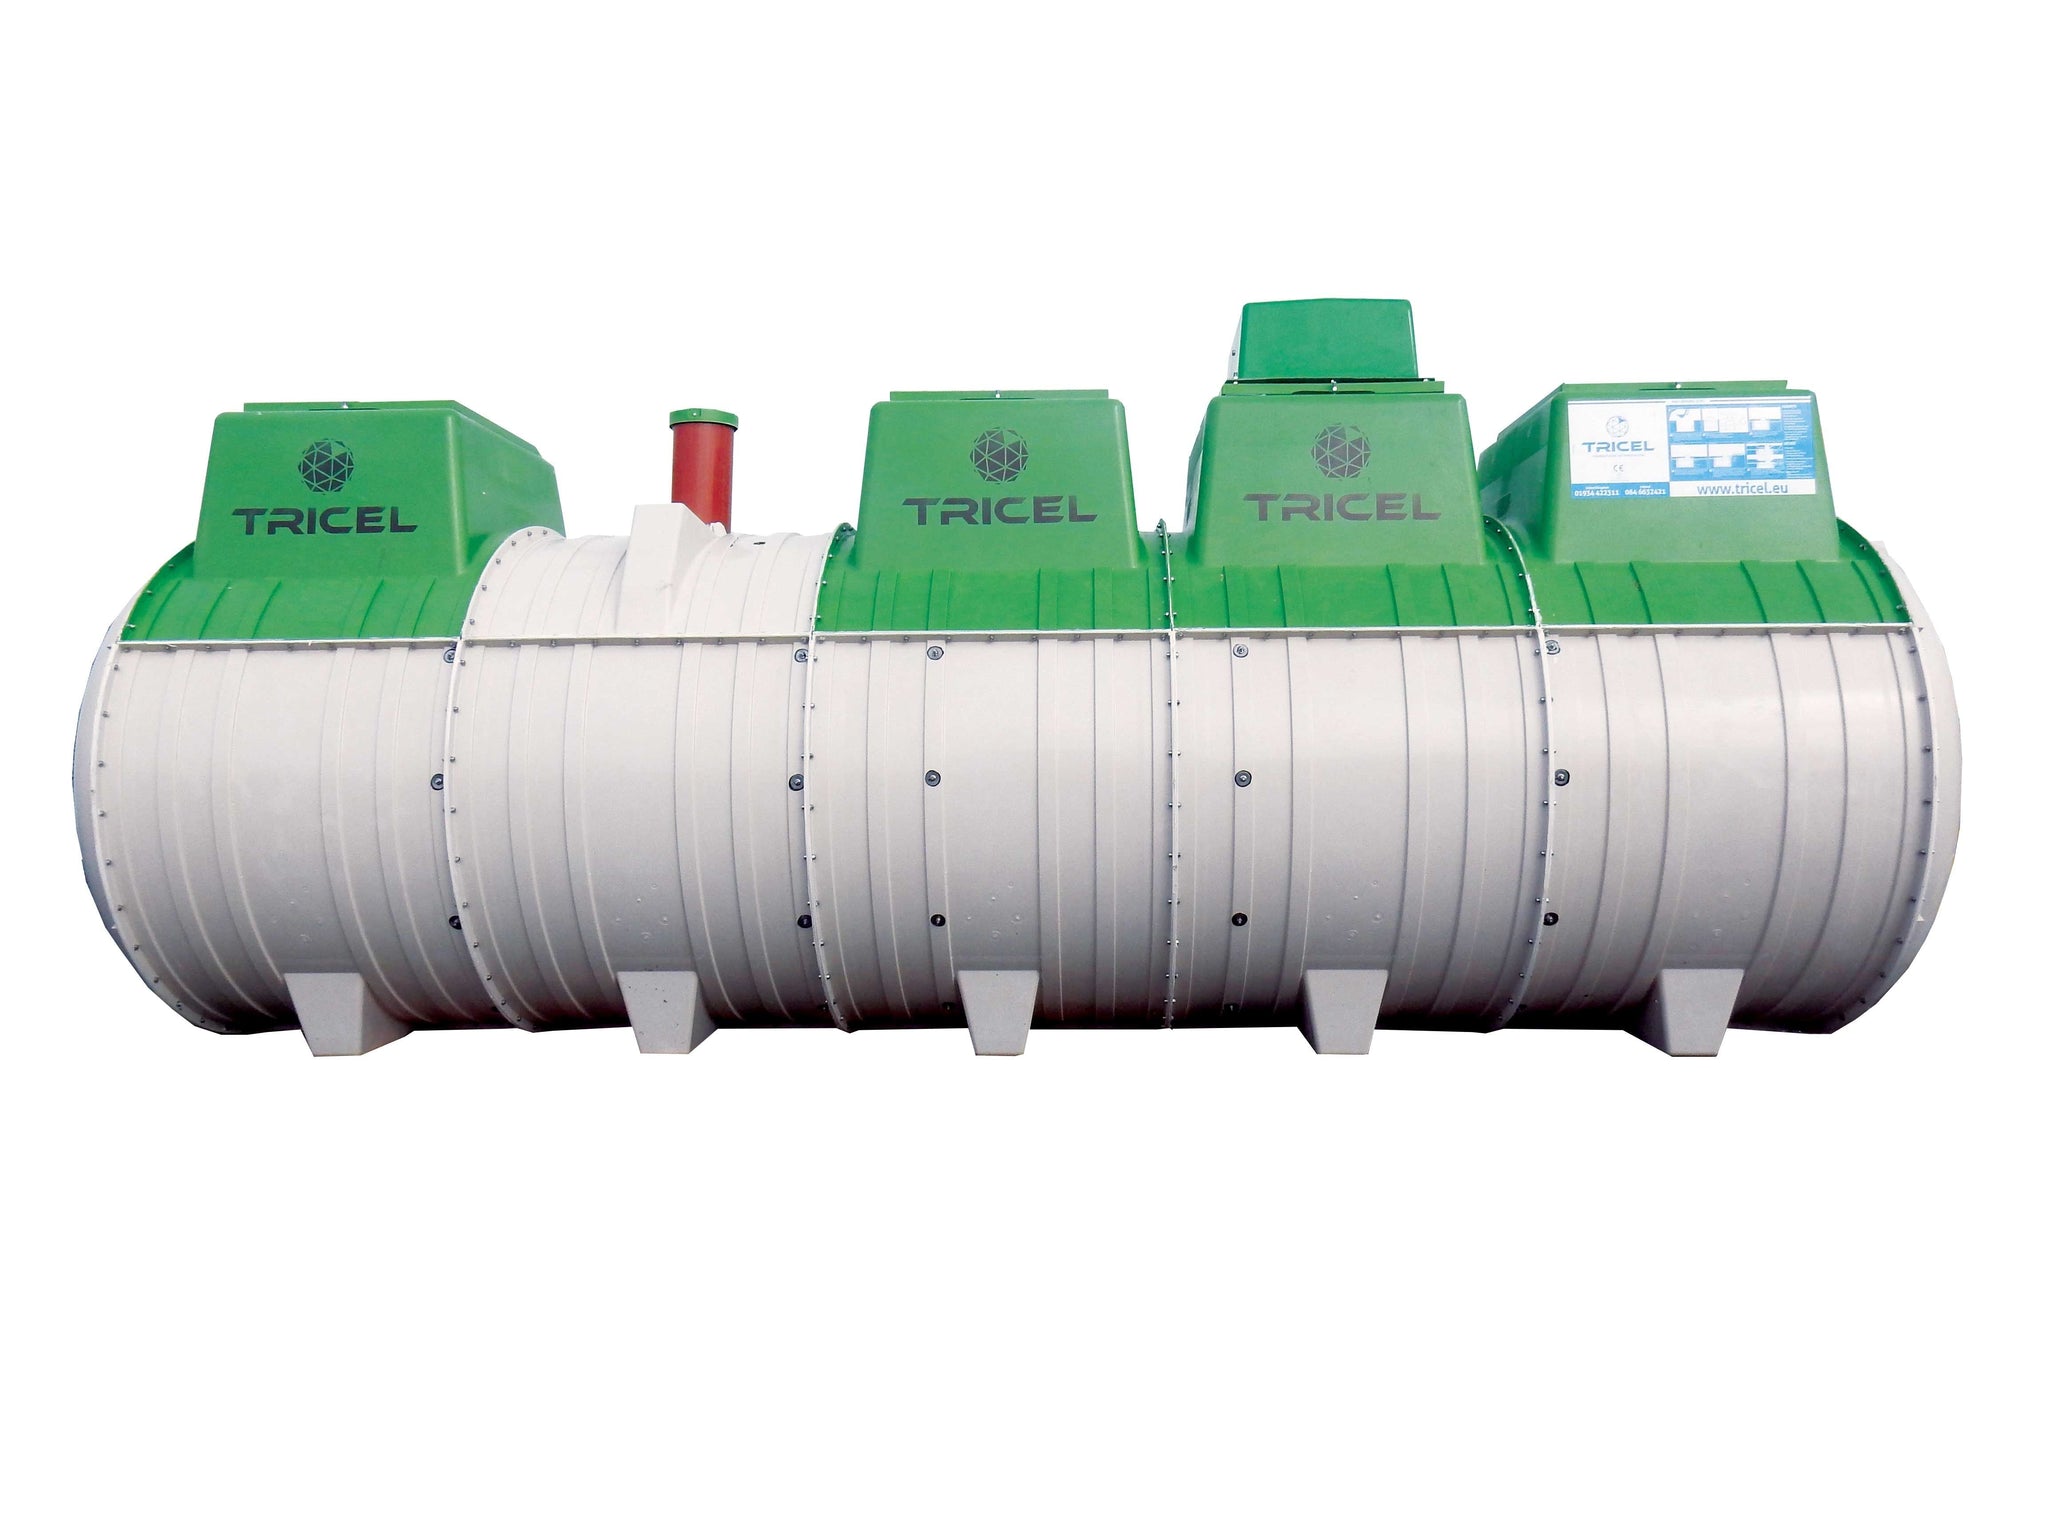 Tricel Novo UK42 Sewage Treatment System (up to 42 Person)